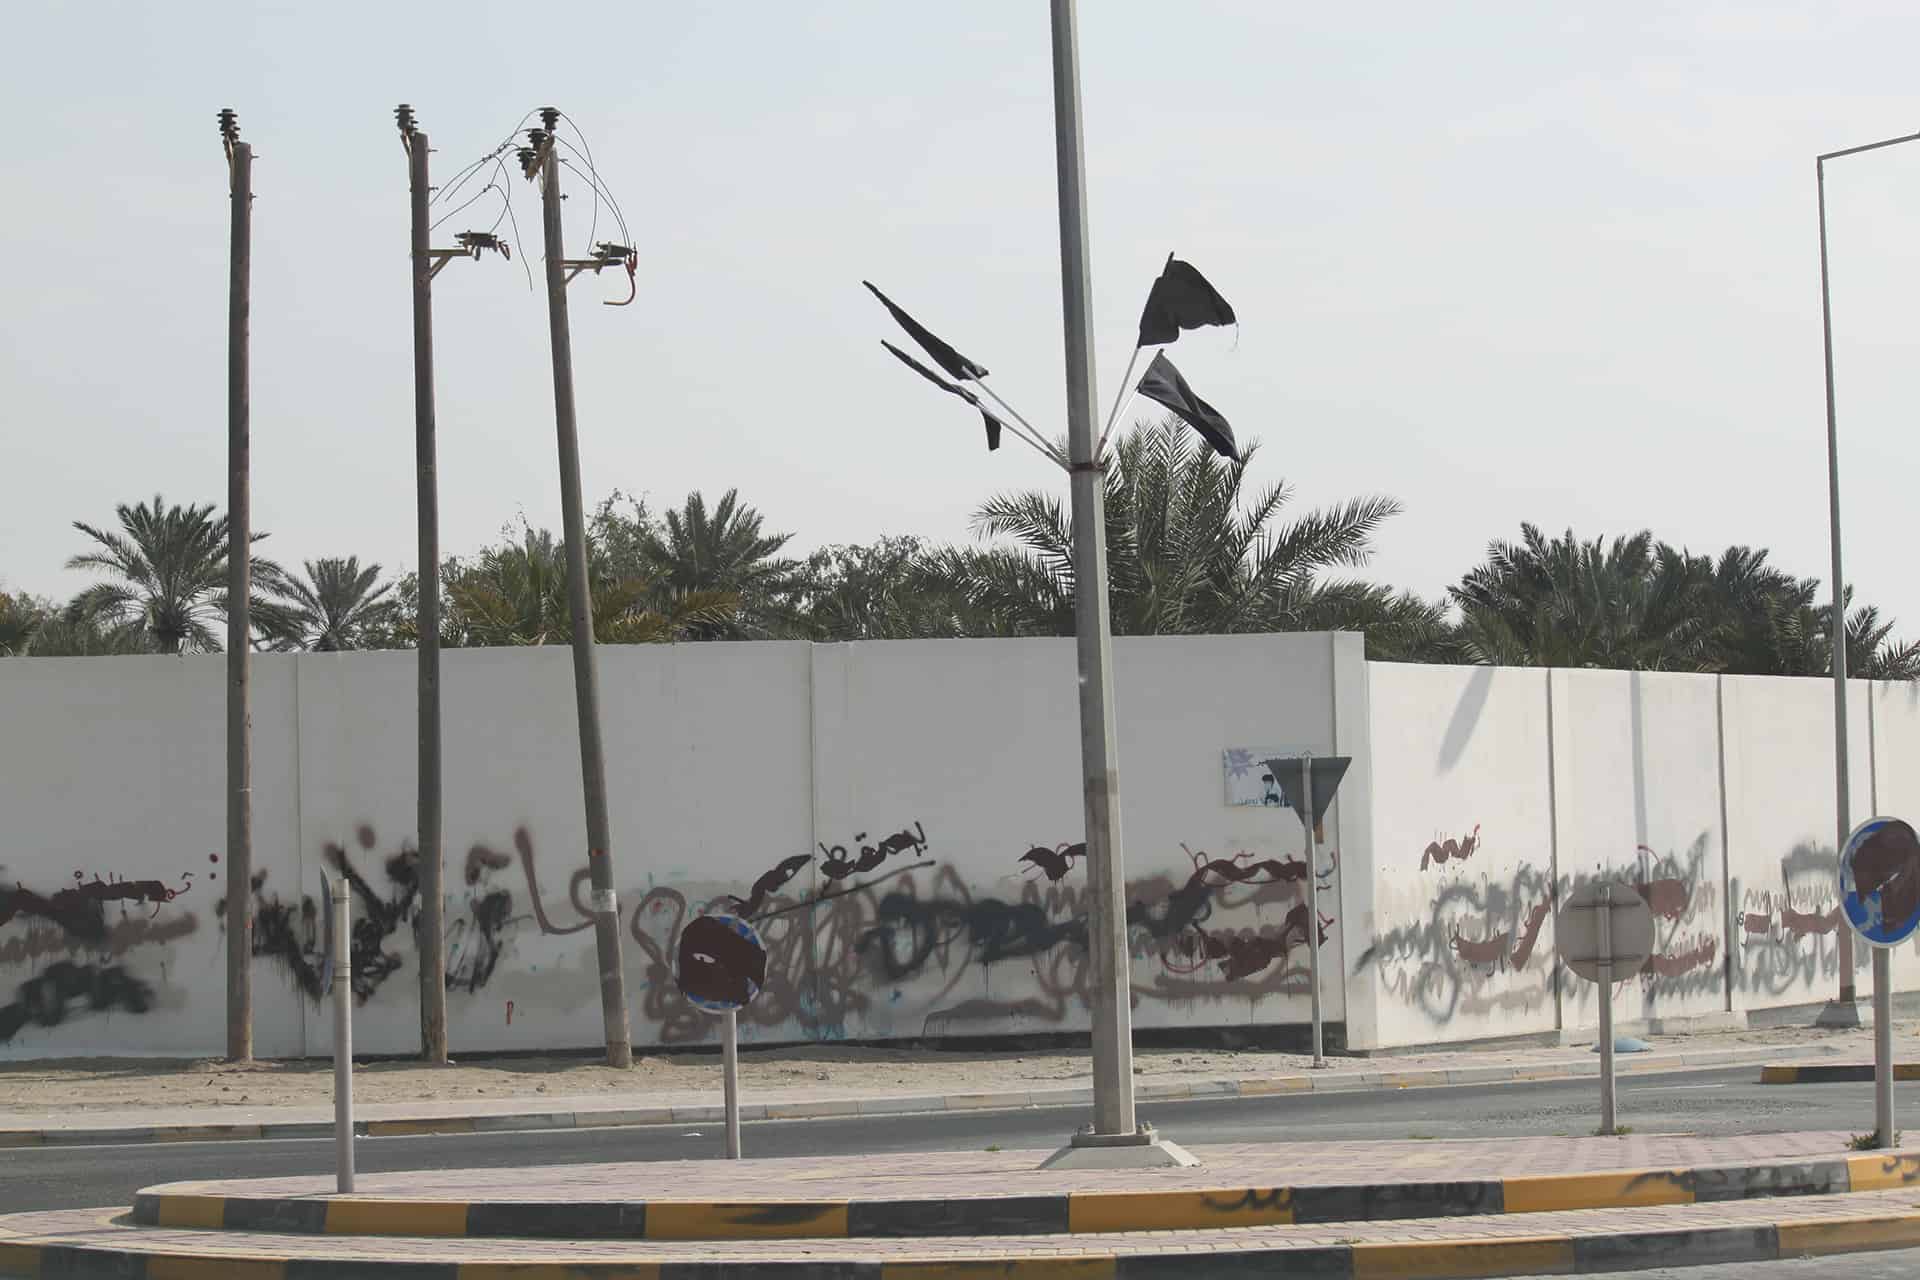 Empty street roundabout in Sitra, Bahrain. Photo taken by ADRIDEN Global Inc.